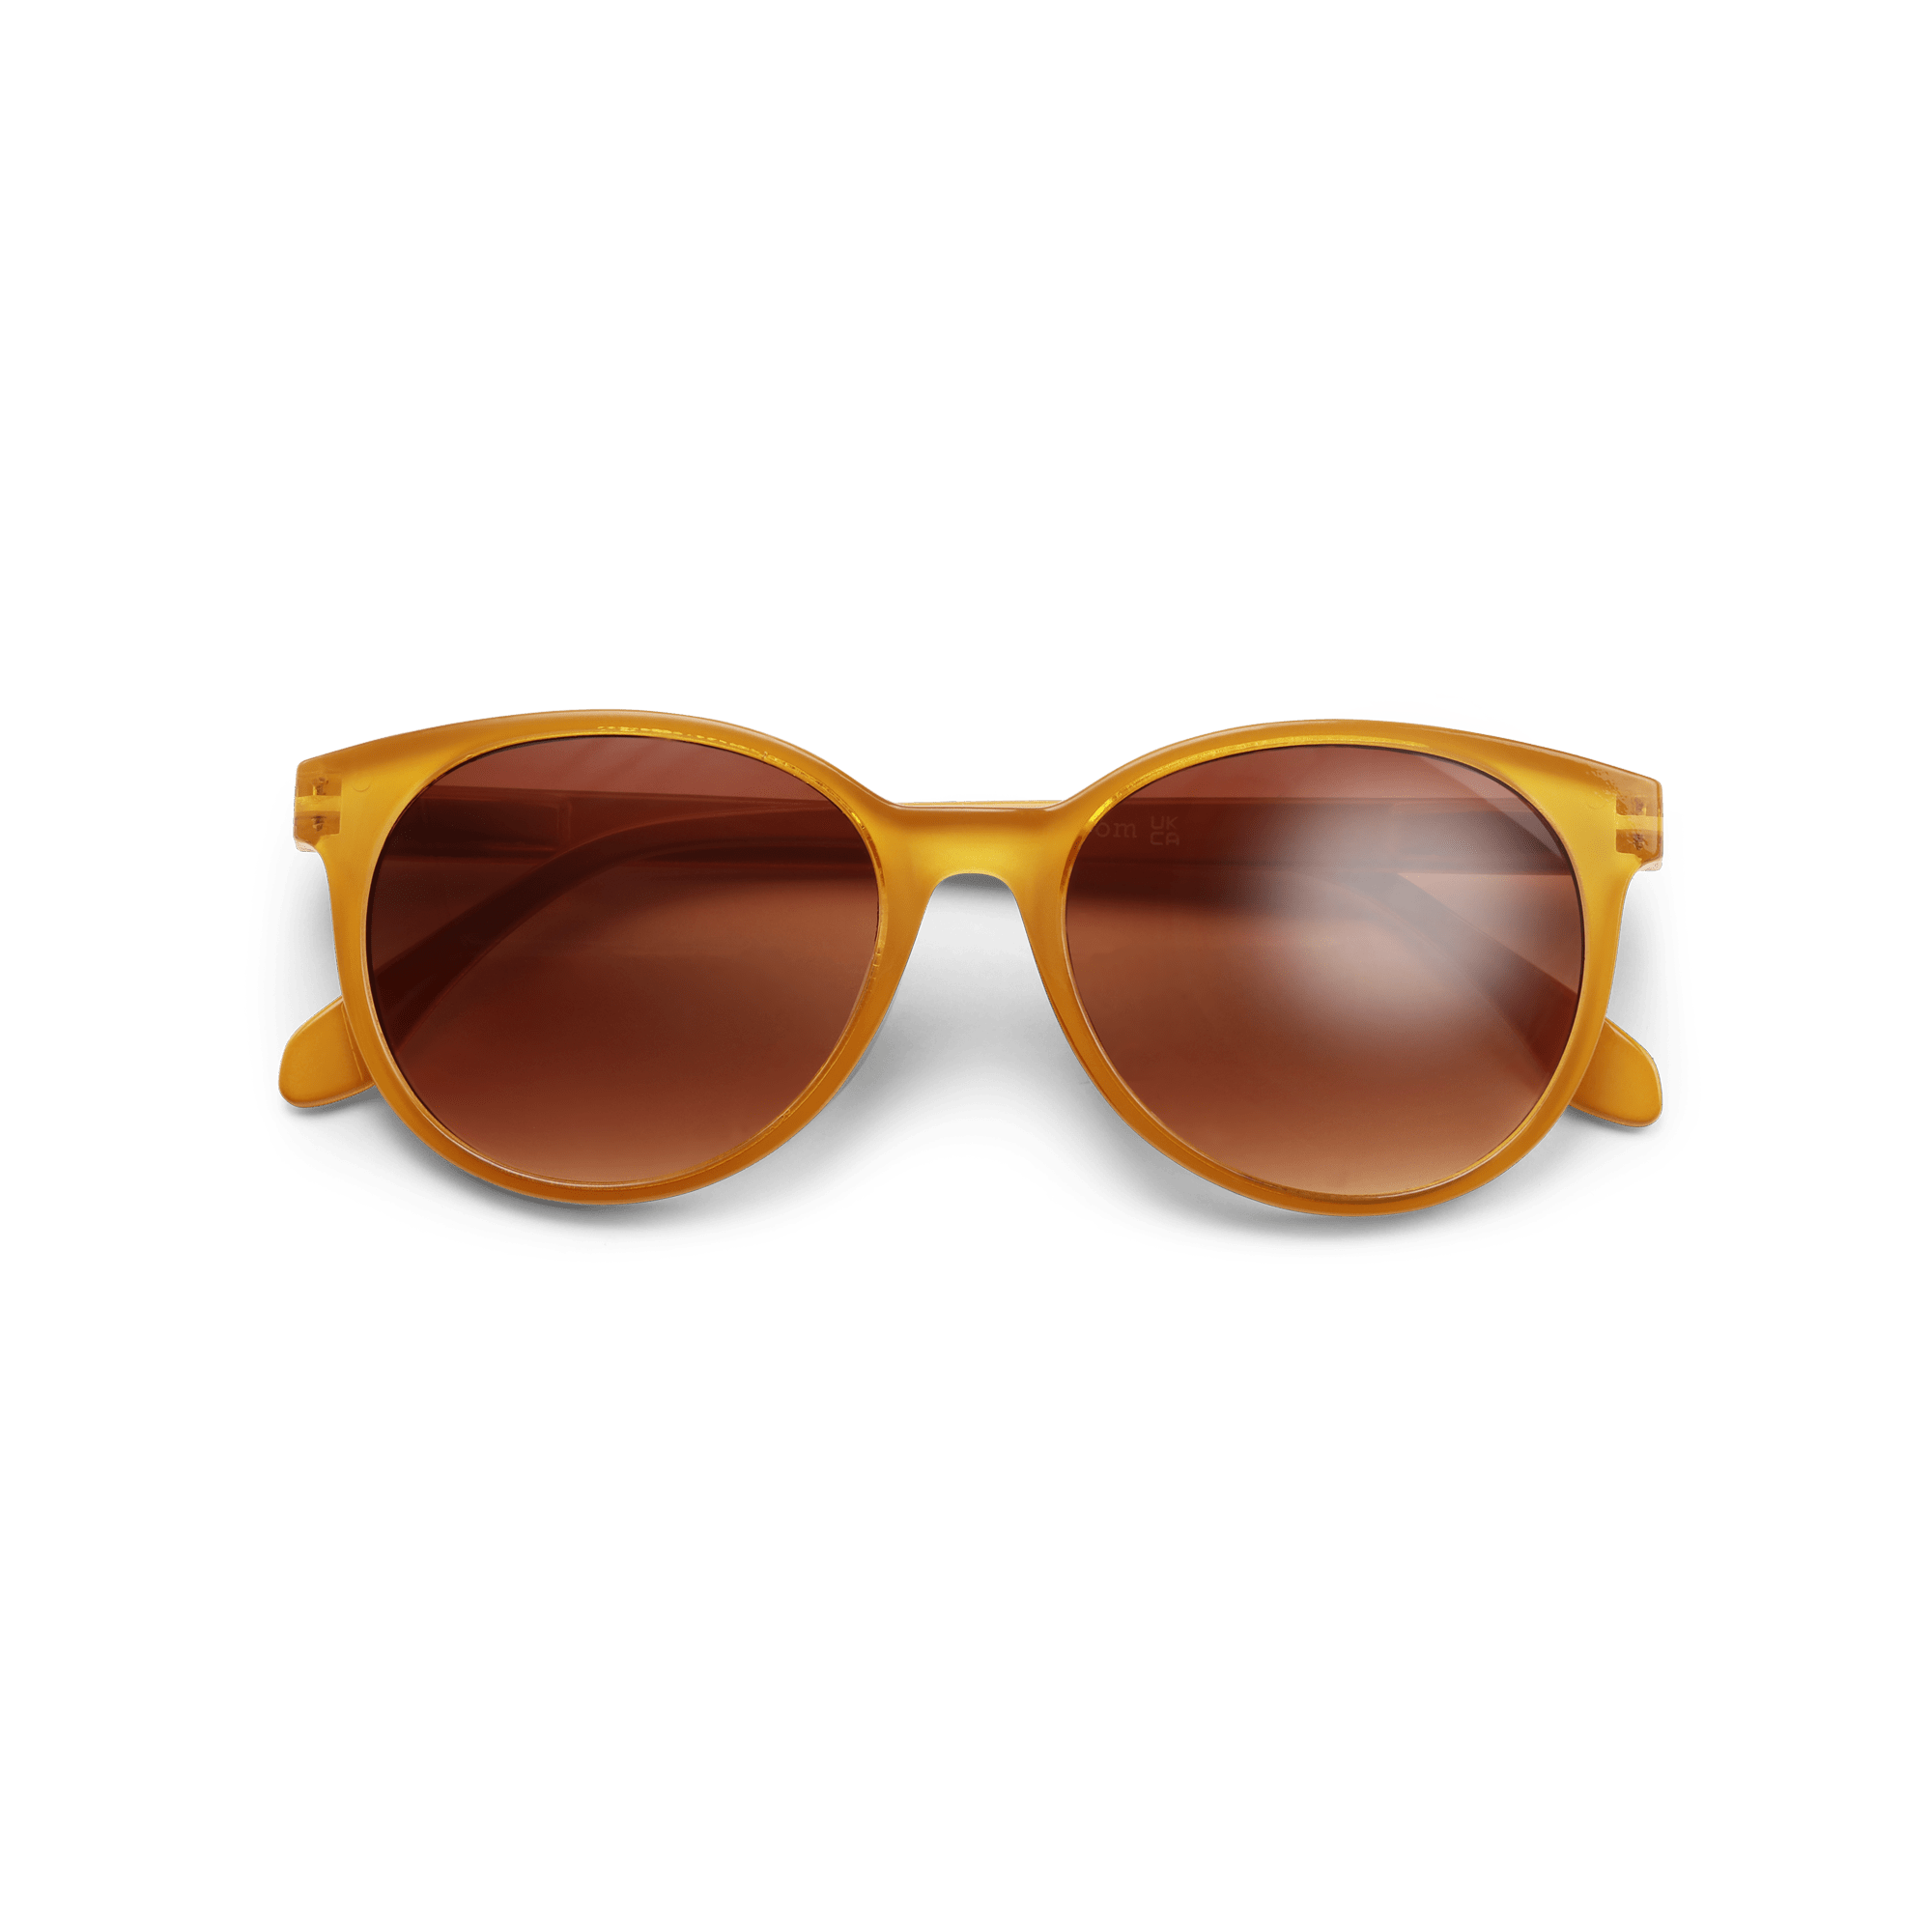 Sunglasses | City | Look Have brown | A